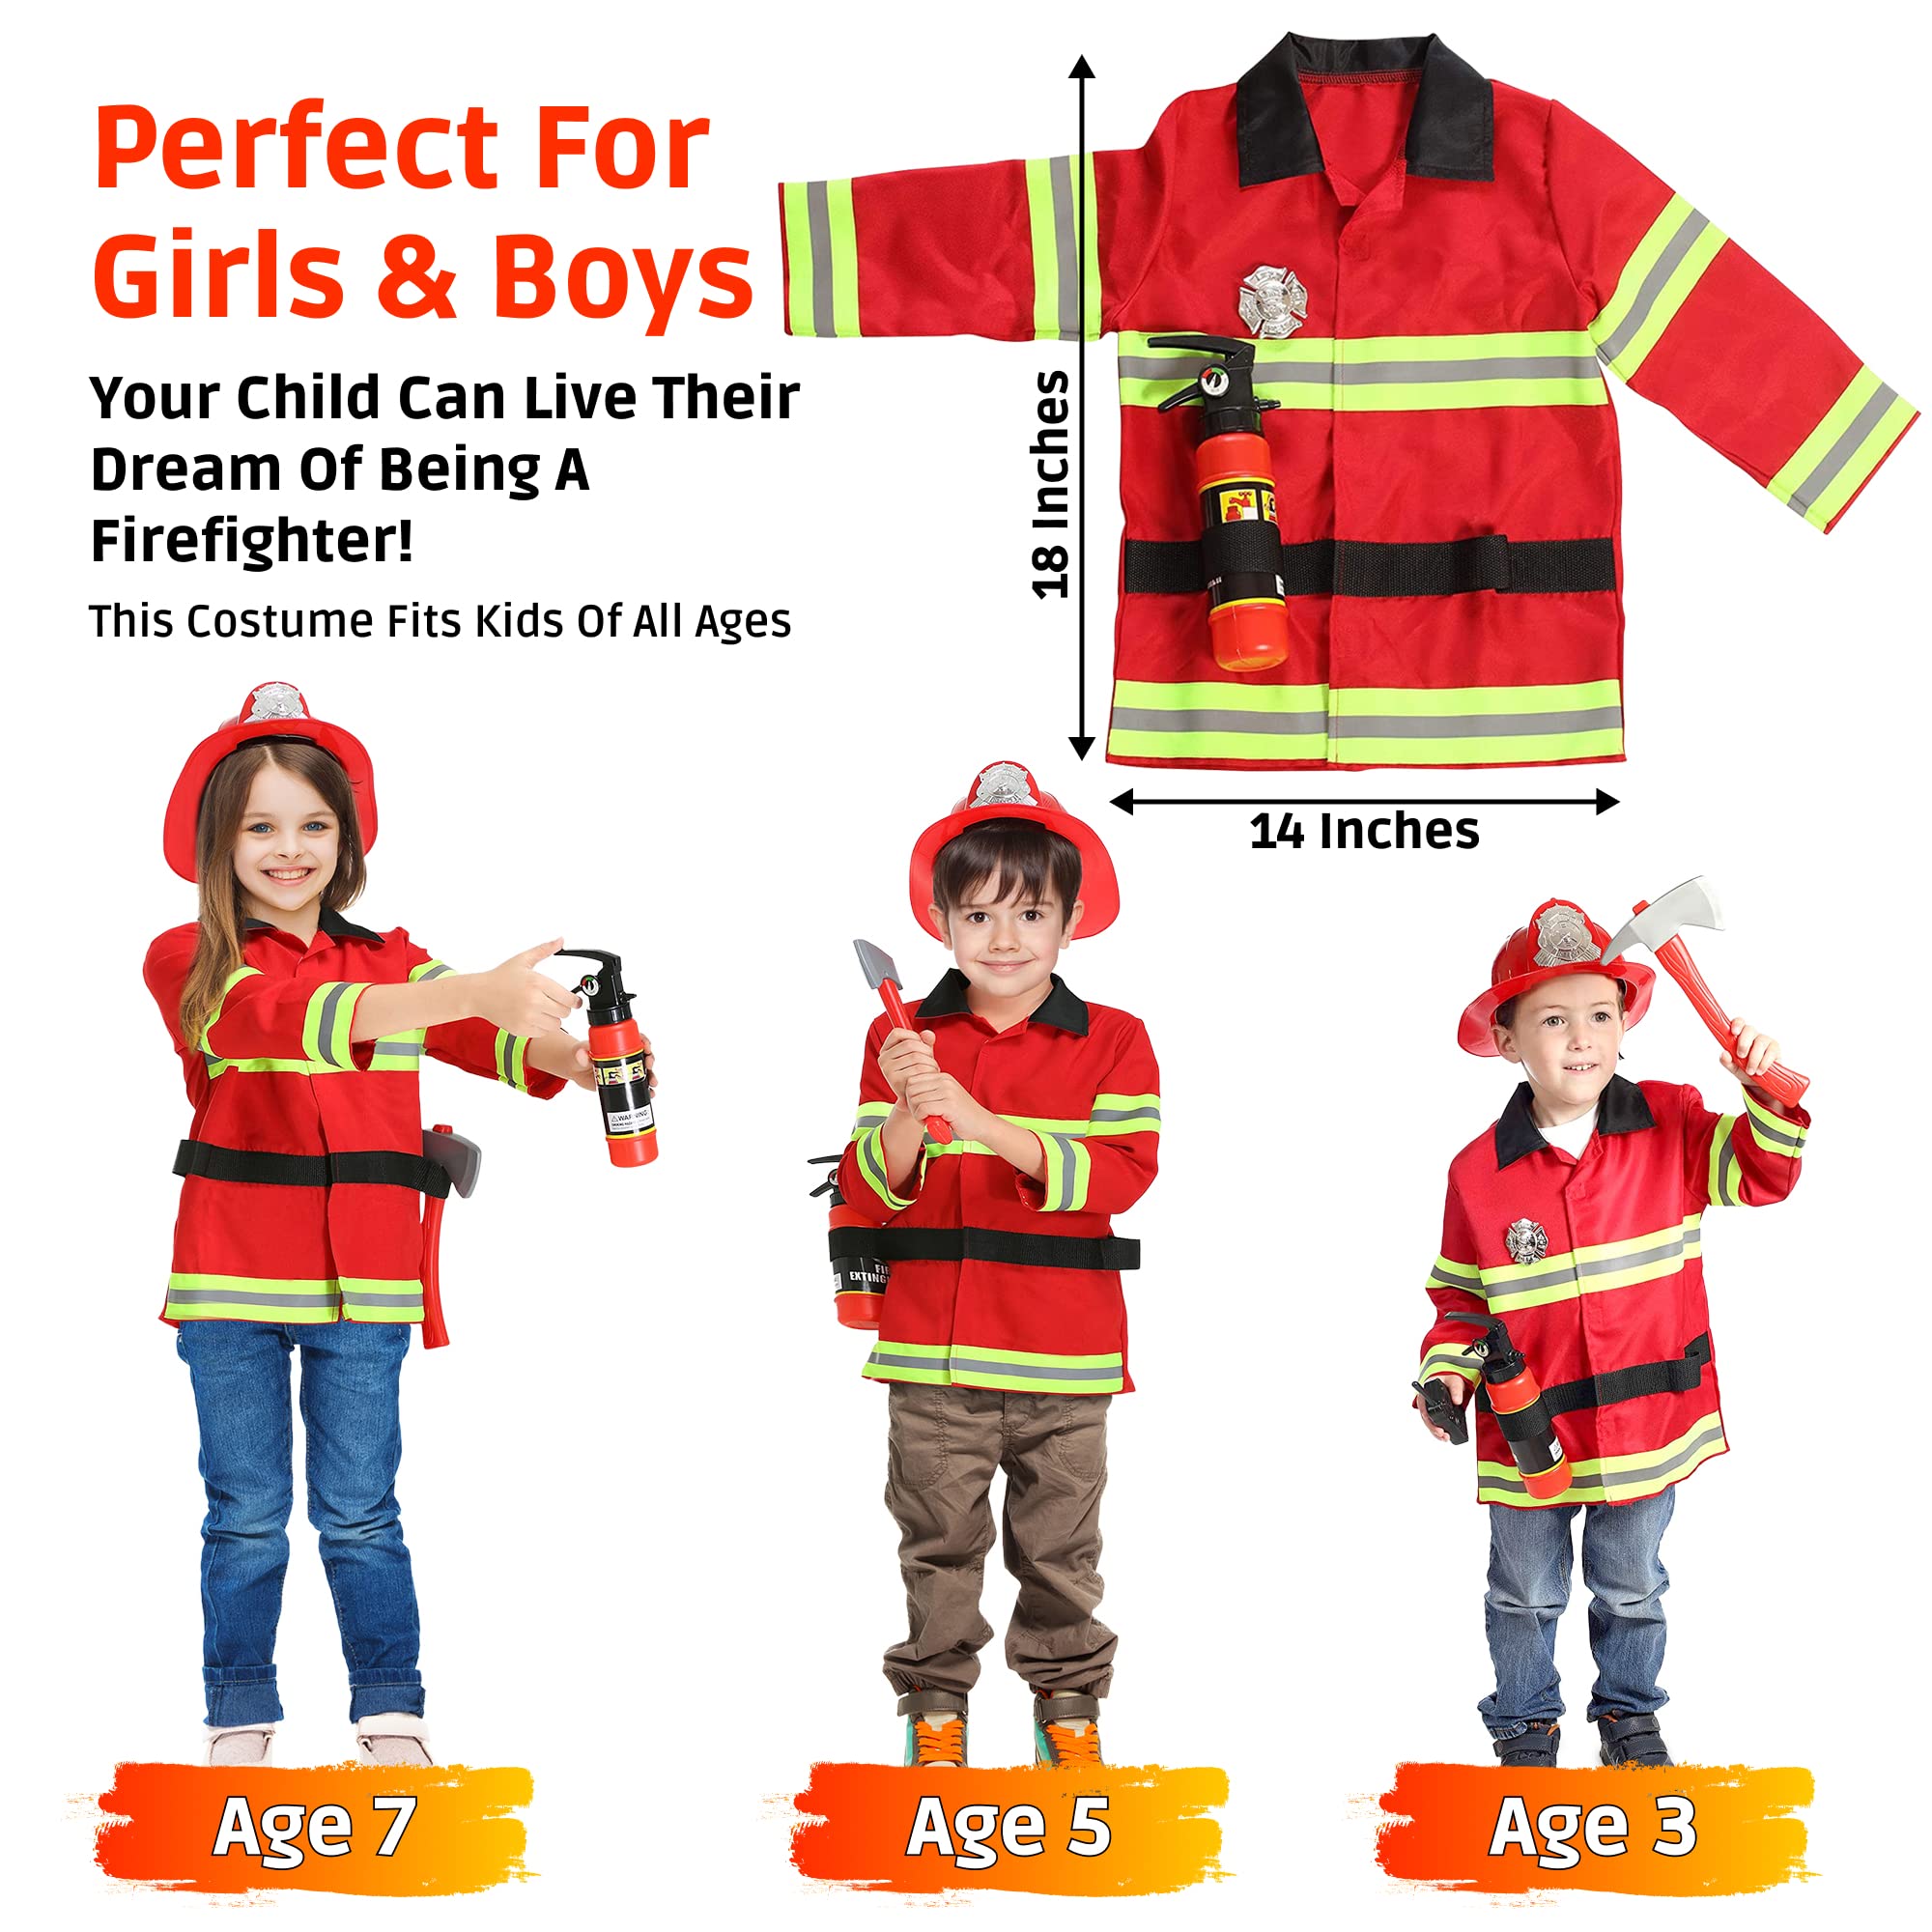 Firefighter Costume for Kids, Toddler Dress Up Costumes, Pretend Play Fireman Costume for Kids with Firefighter Gear, For Boys and Girls Ages 3-7